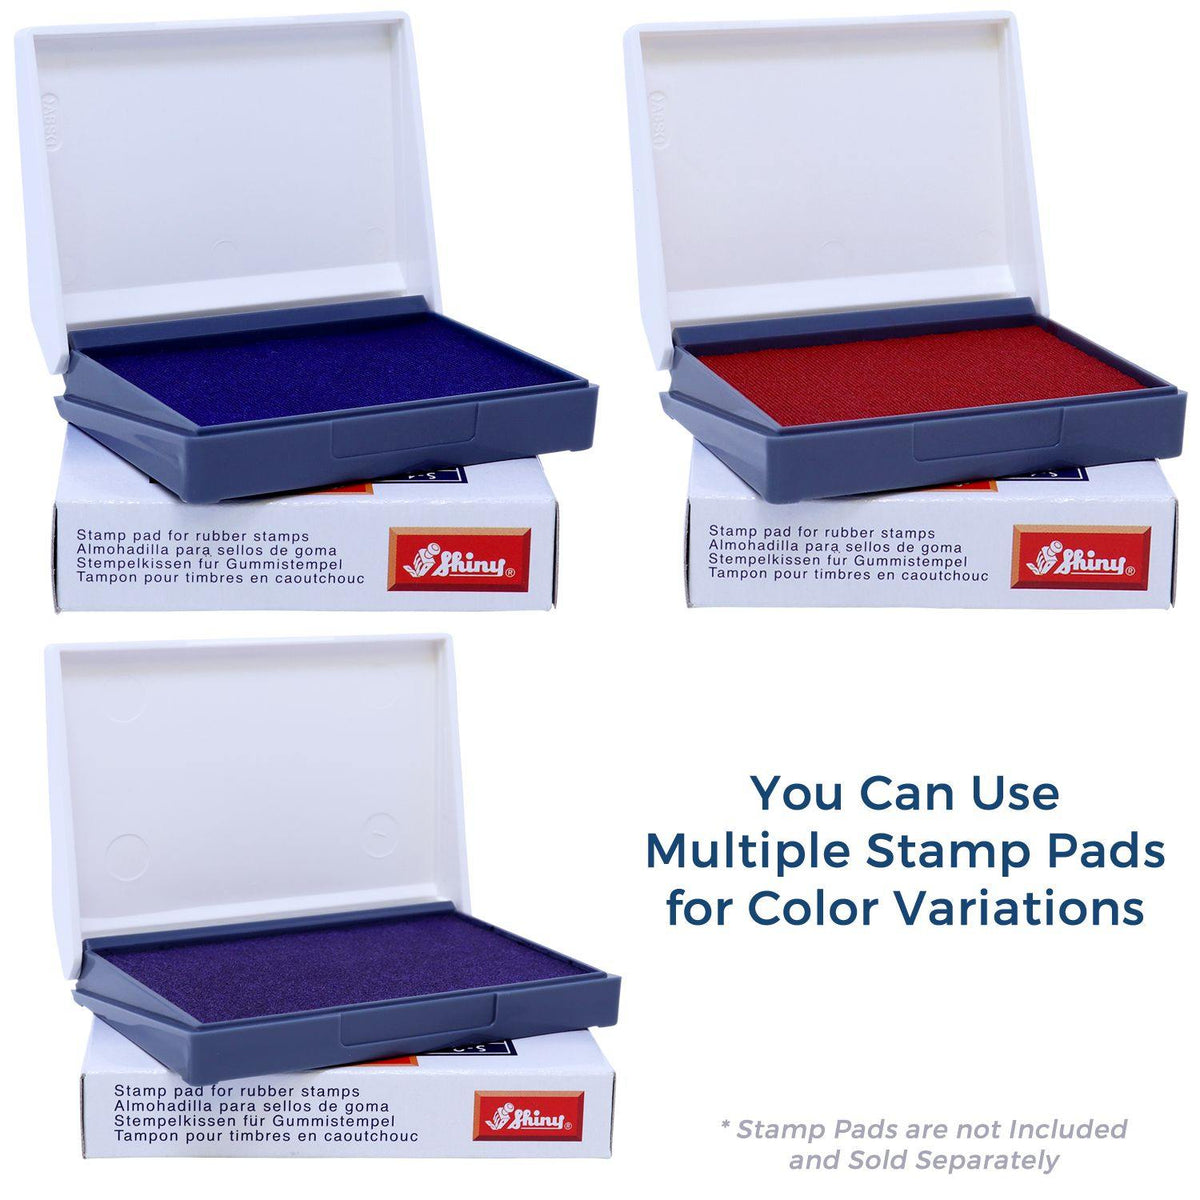 Stamp Pads for Vacant Rubber Stamp Available